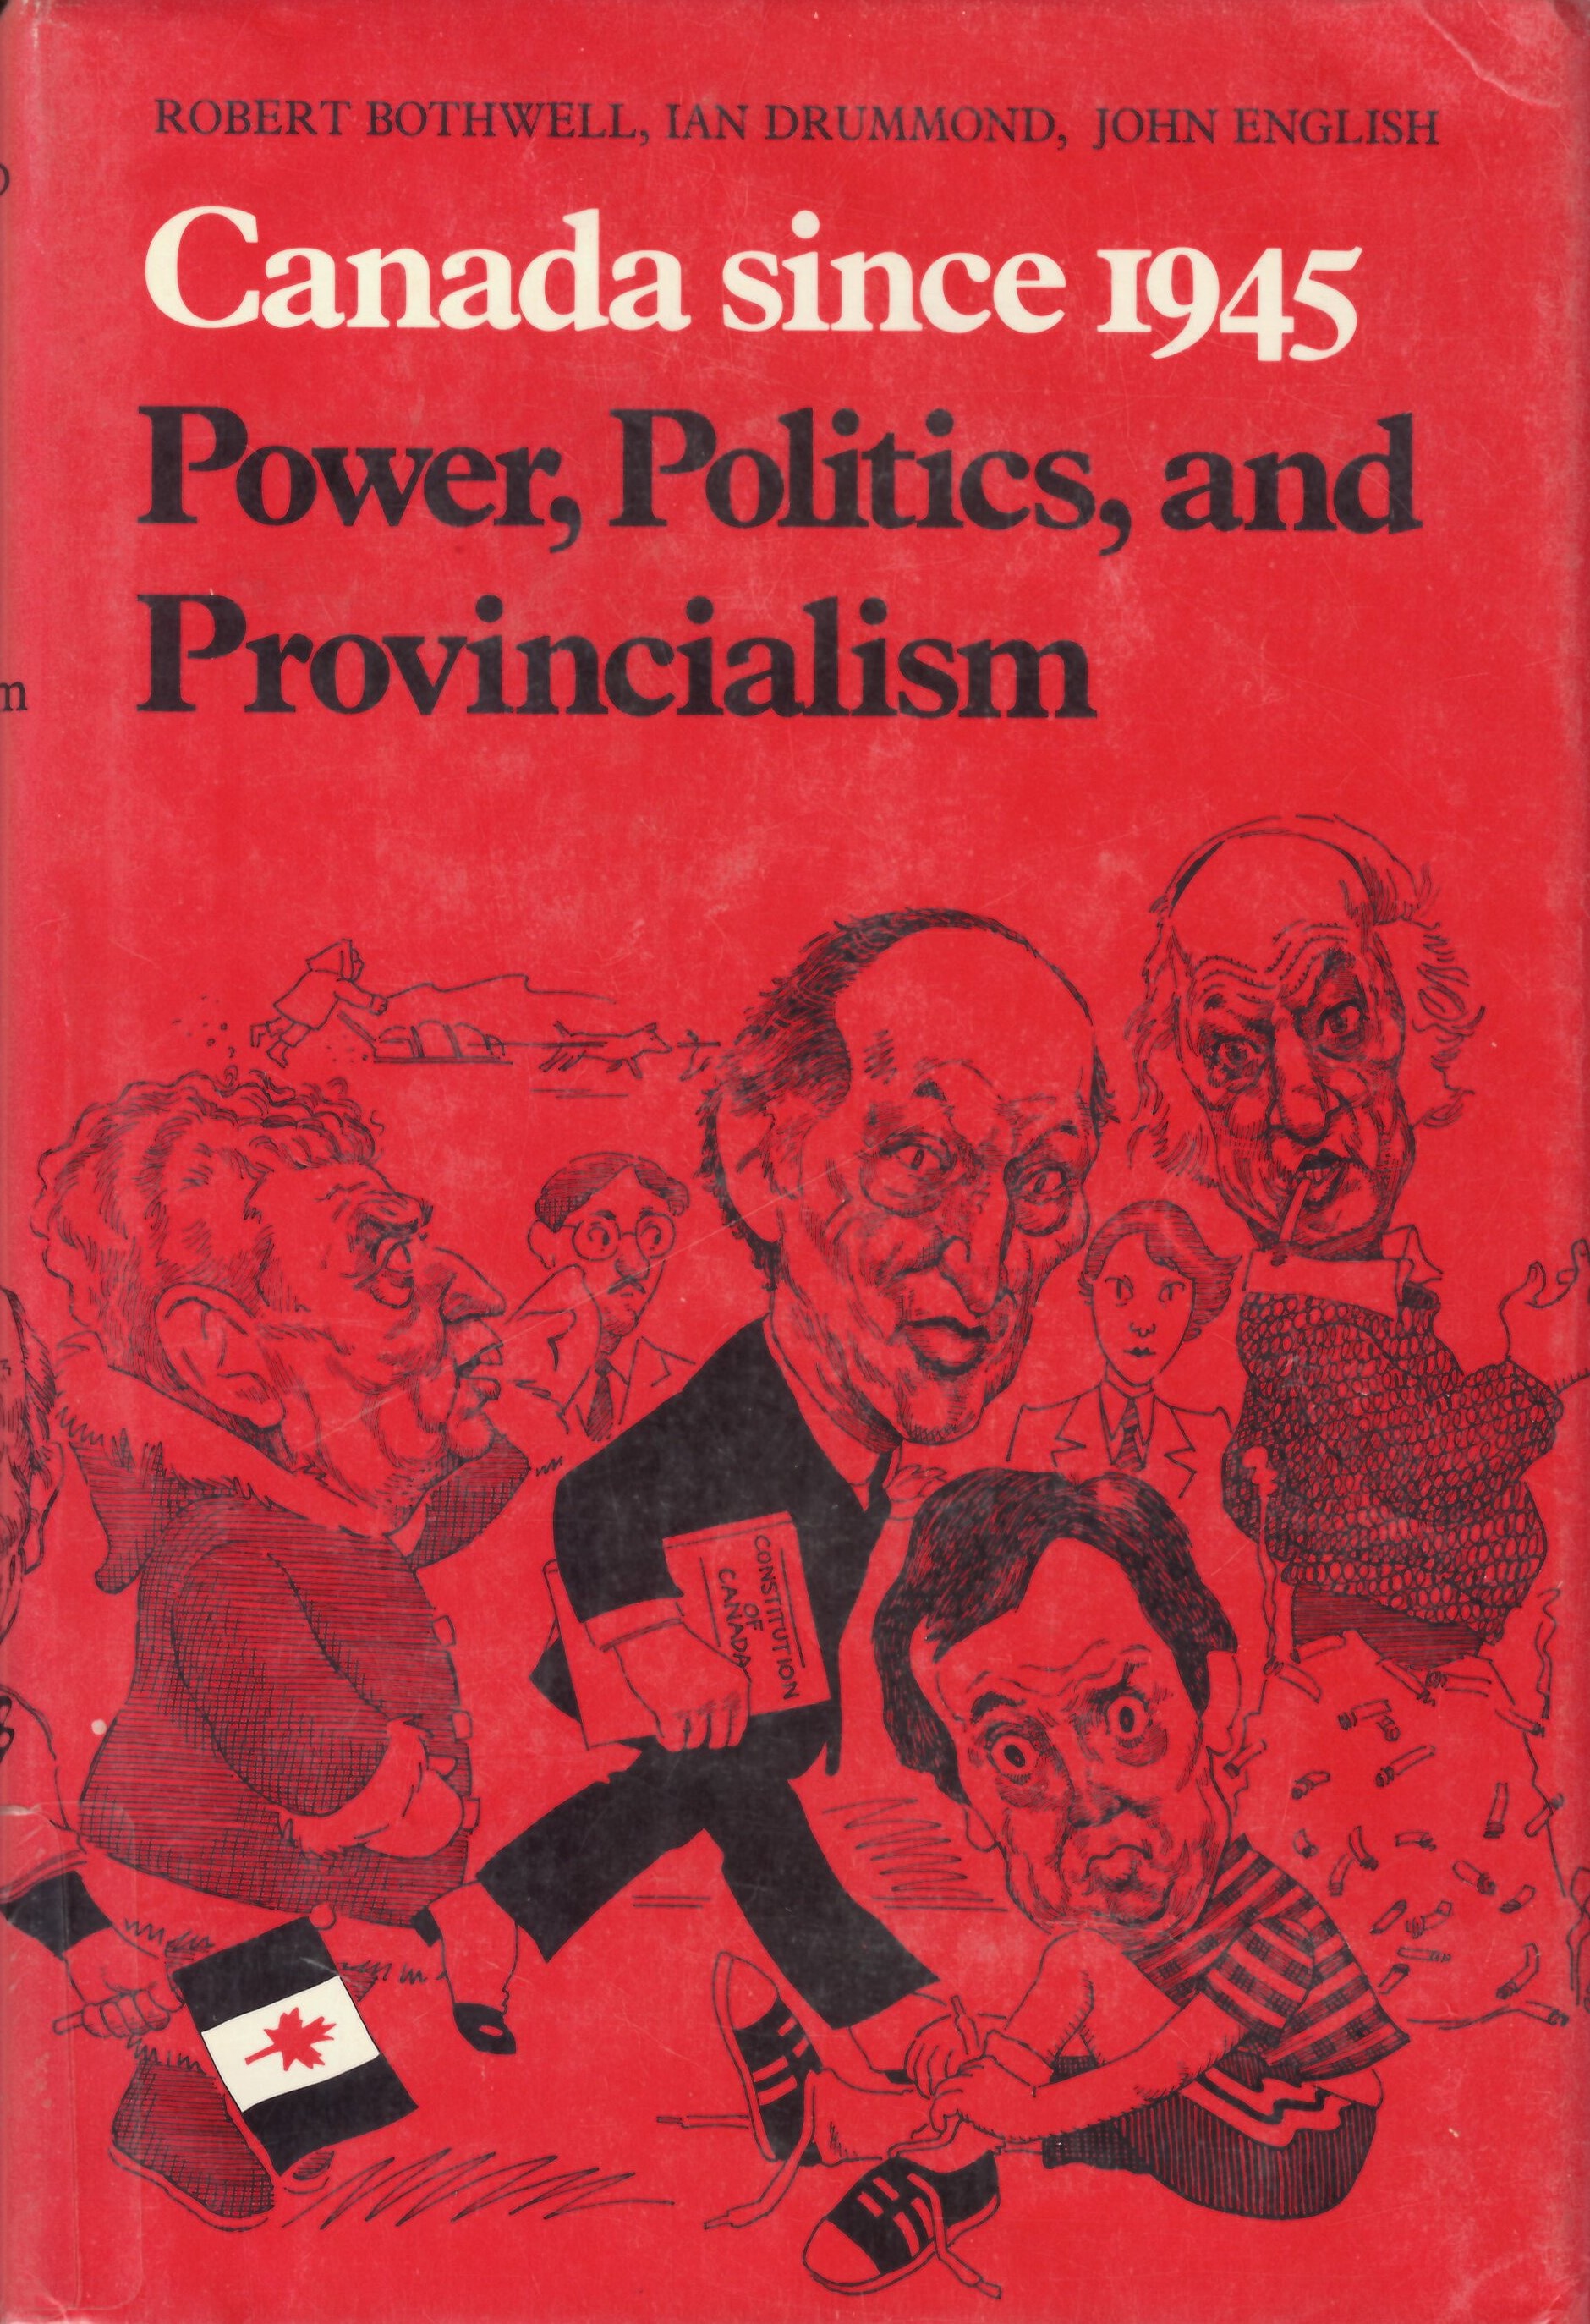 Canada since 1945 : Power, Politics, and Provincialism